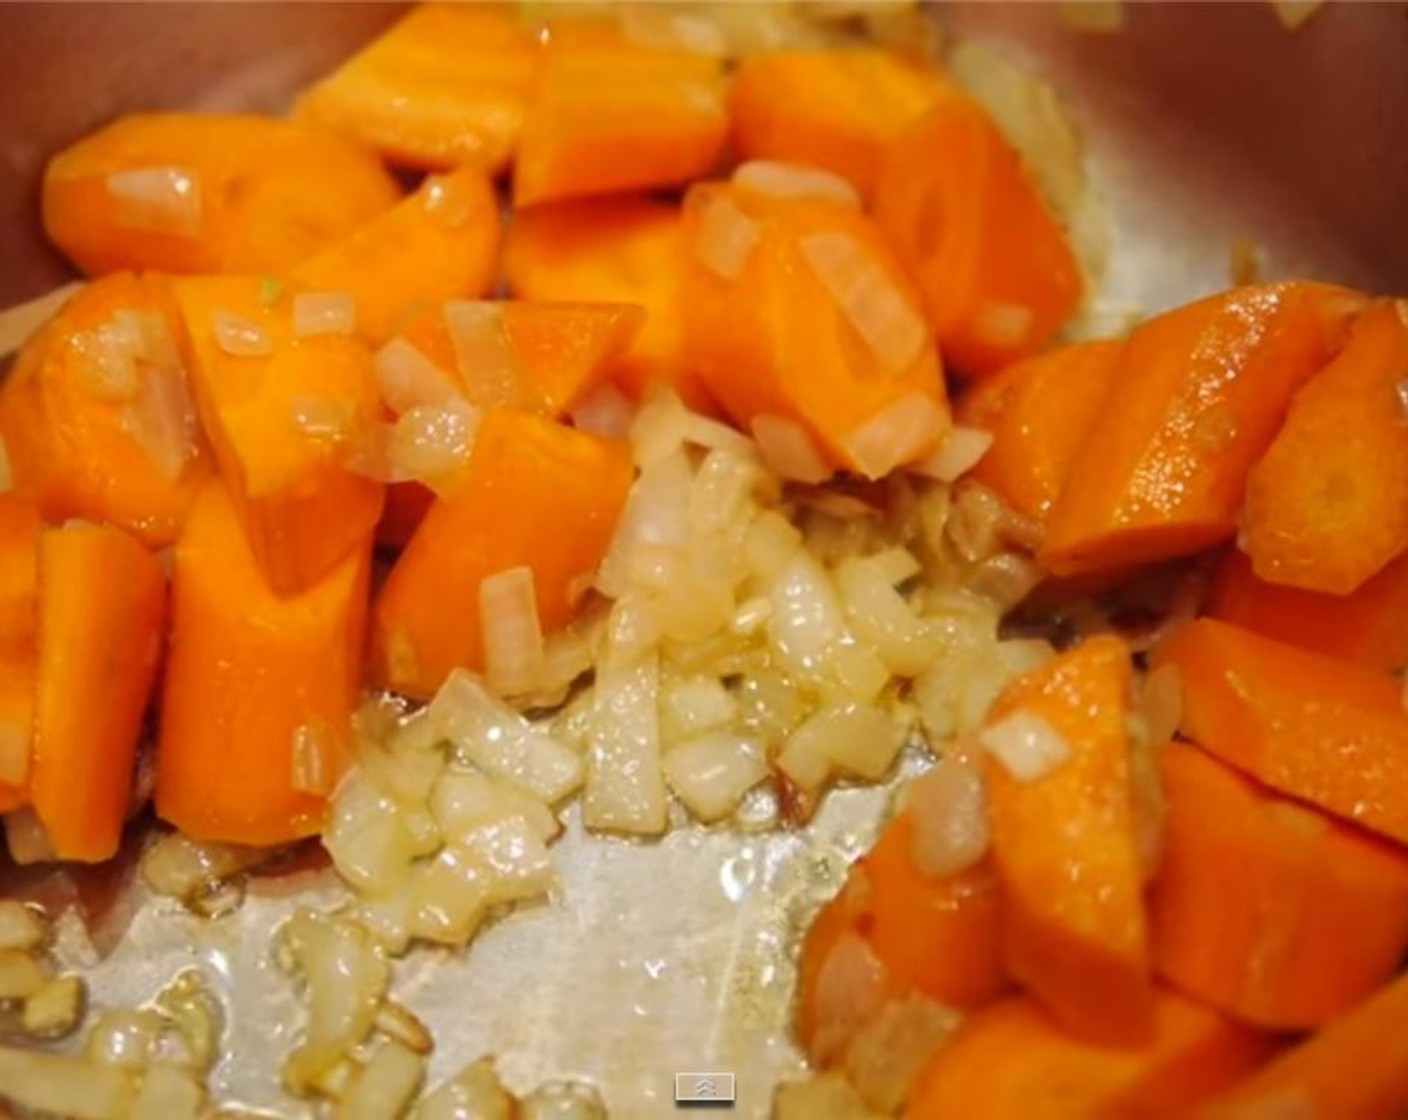 step 5 Add the carrots to the onion. Saute them together for 2 minutes.